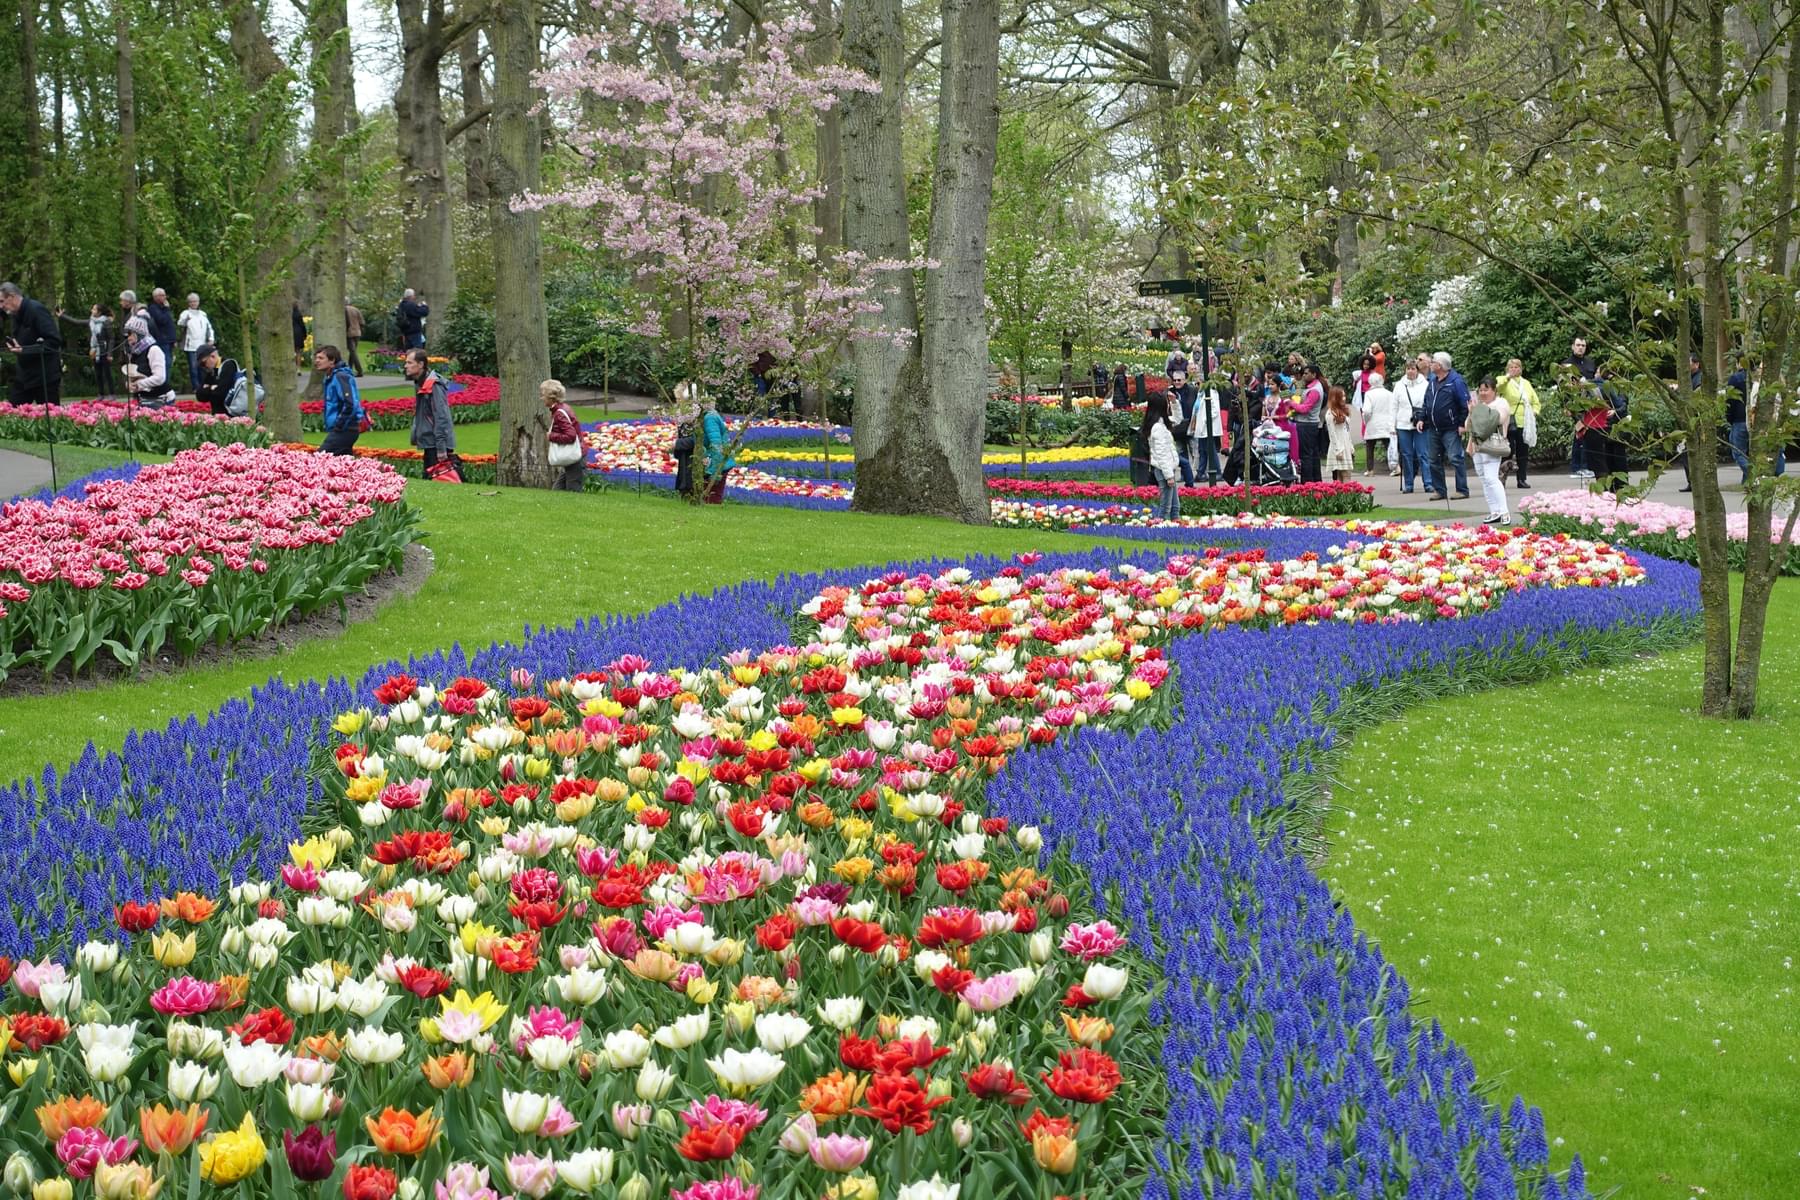 Day Trip from Amsterdam to Keukenhof Gardens with Windmill Cruise